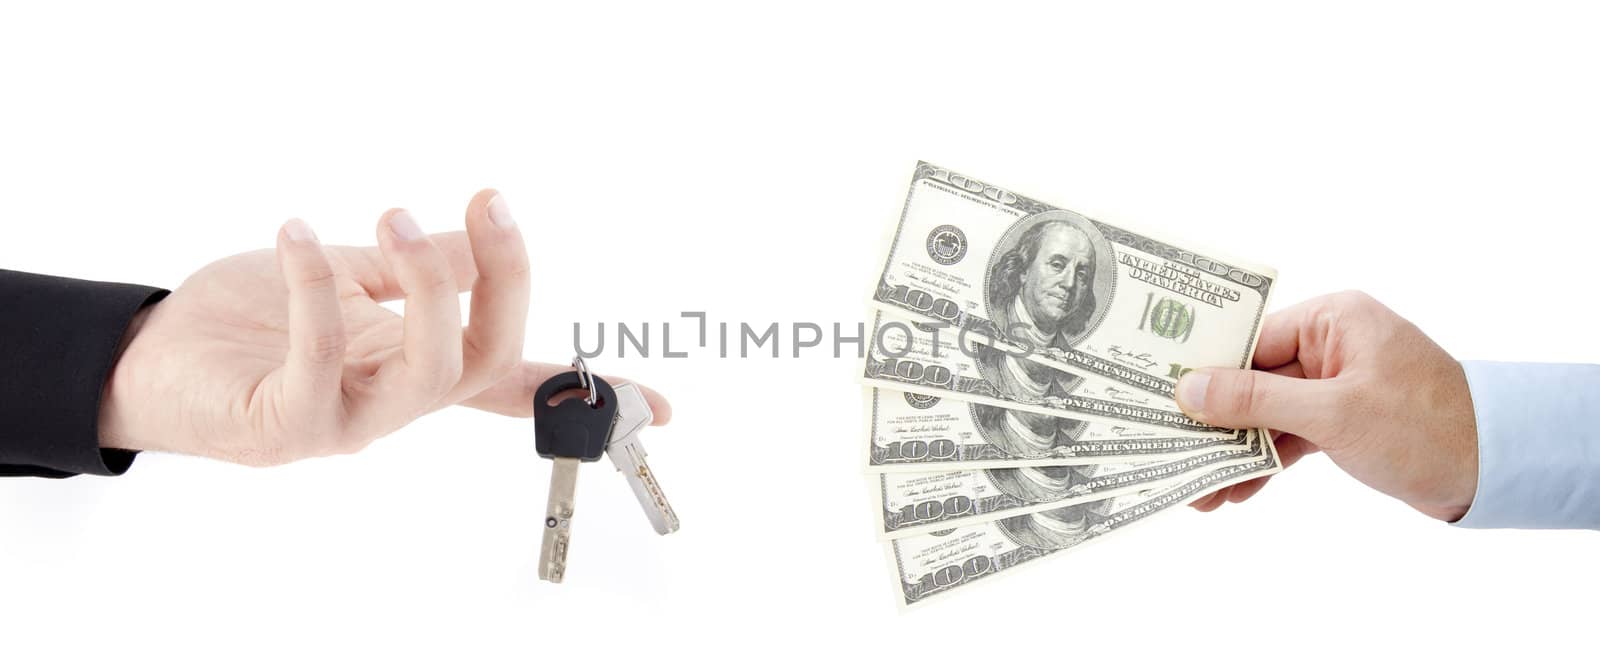 hands holdind money and car keys isolated on white background